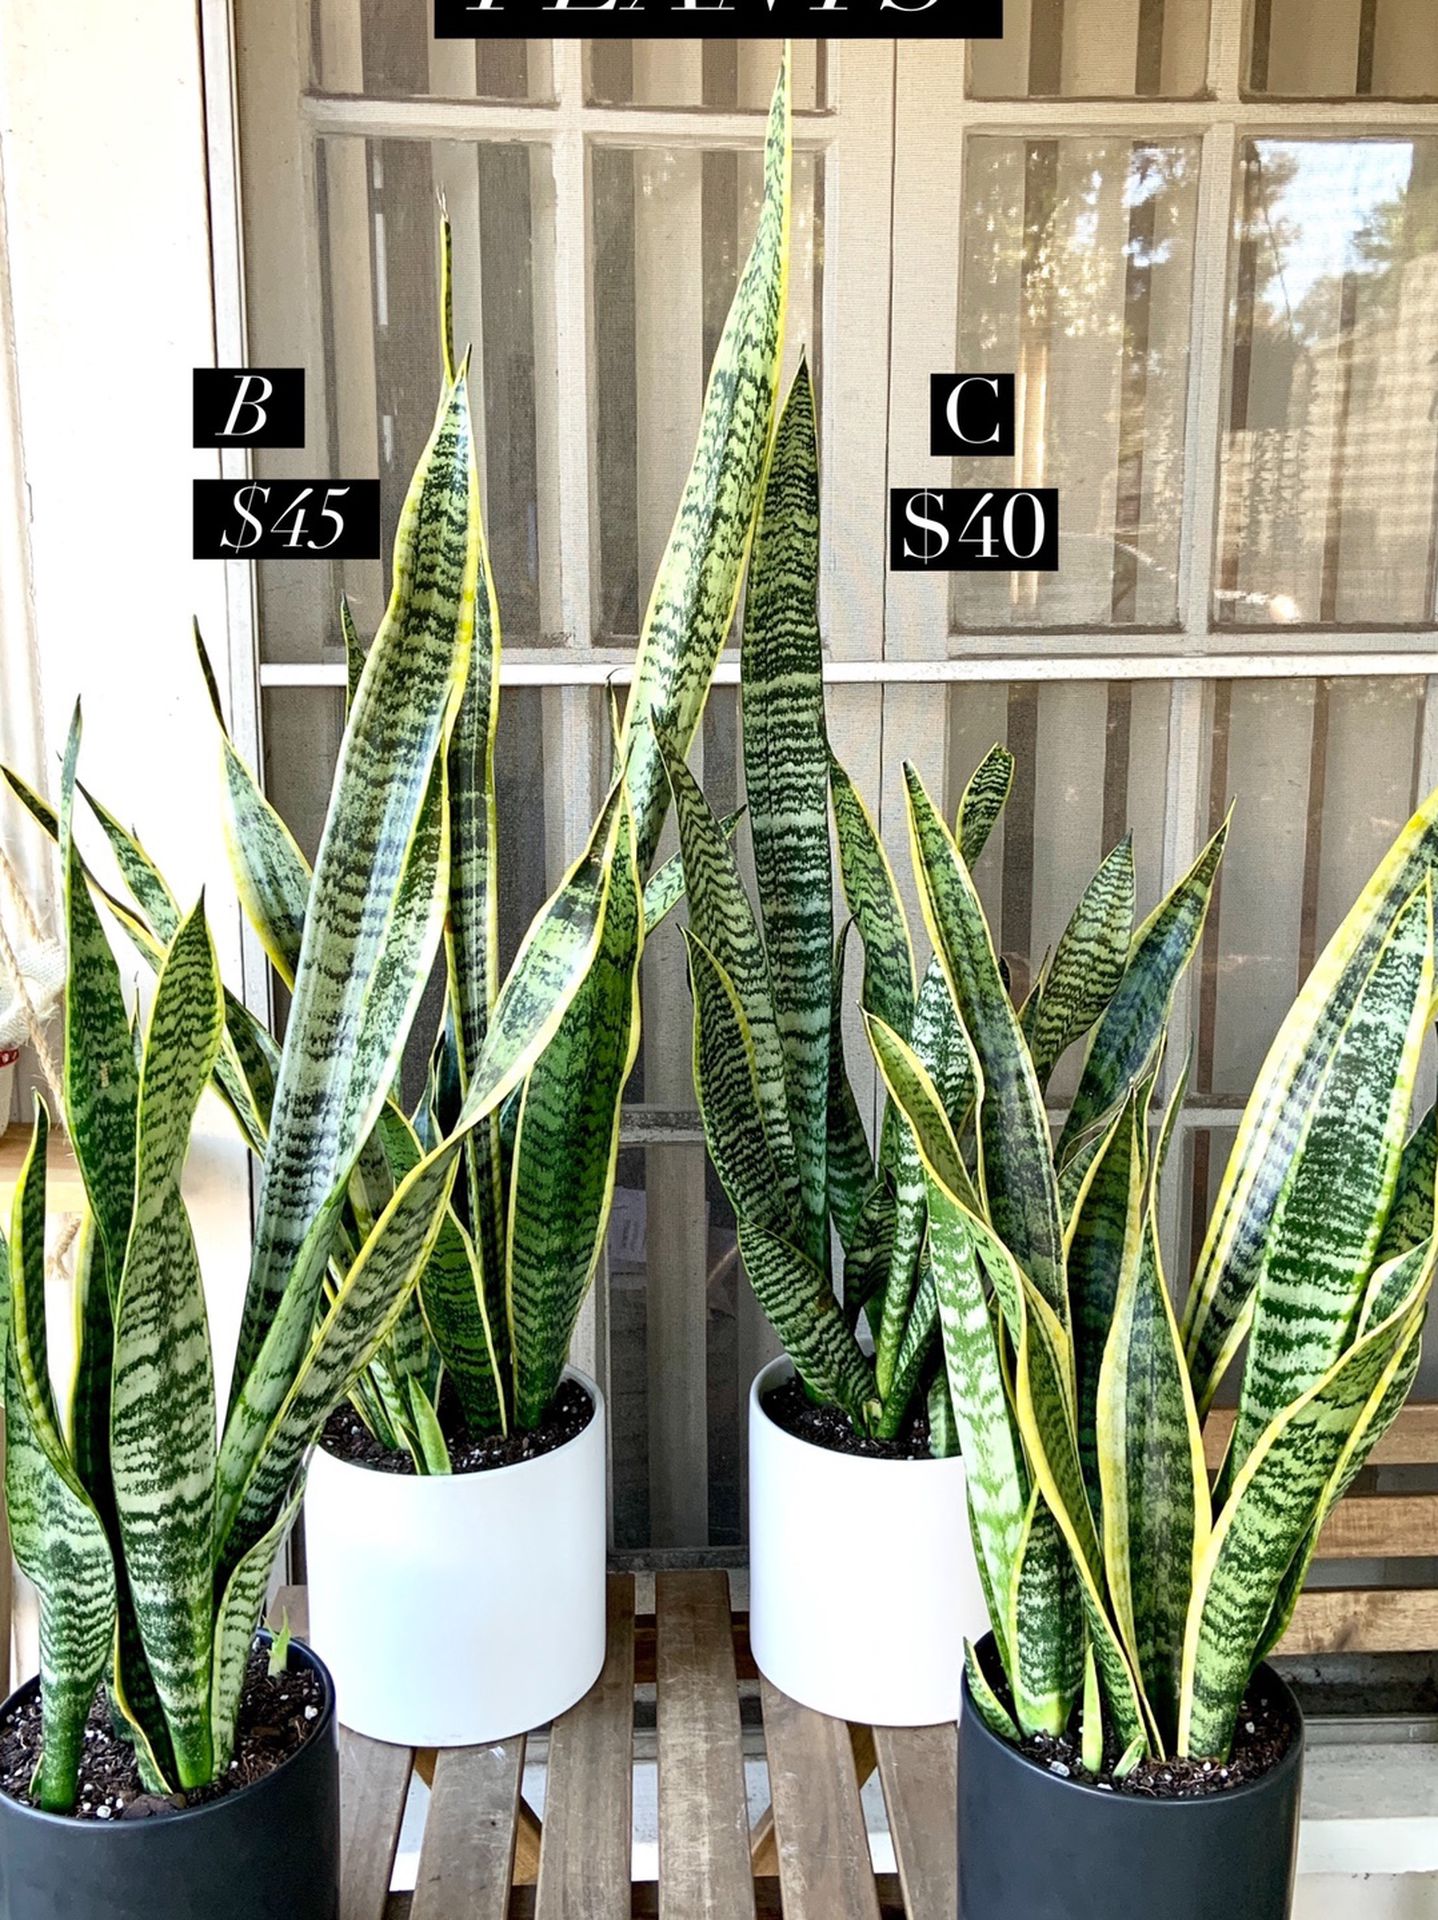 Tall 2-3FT Snake Plants in 5-6” Decor Pots!